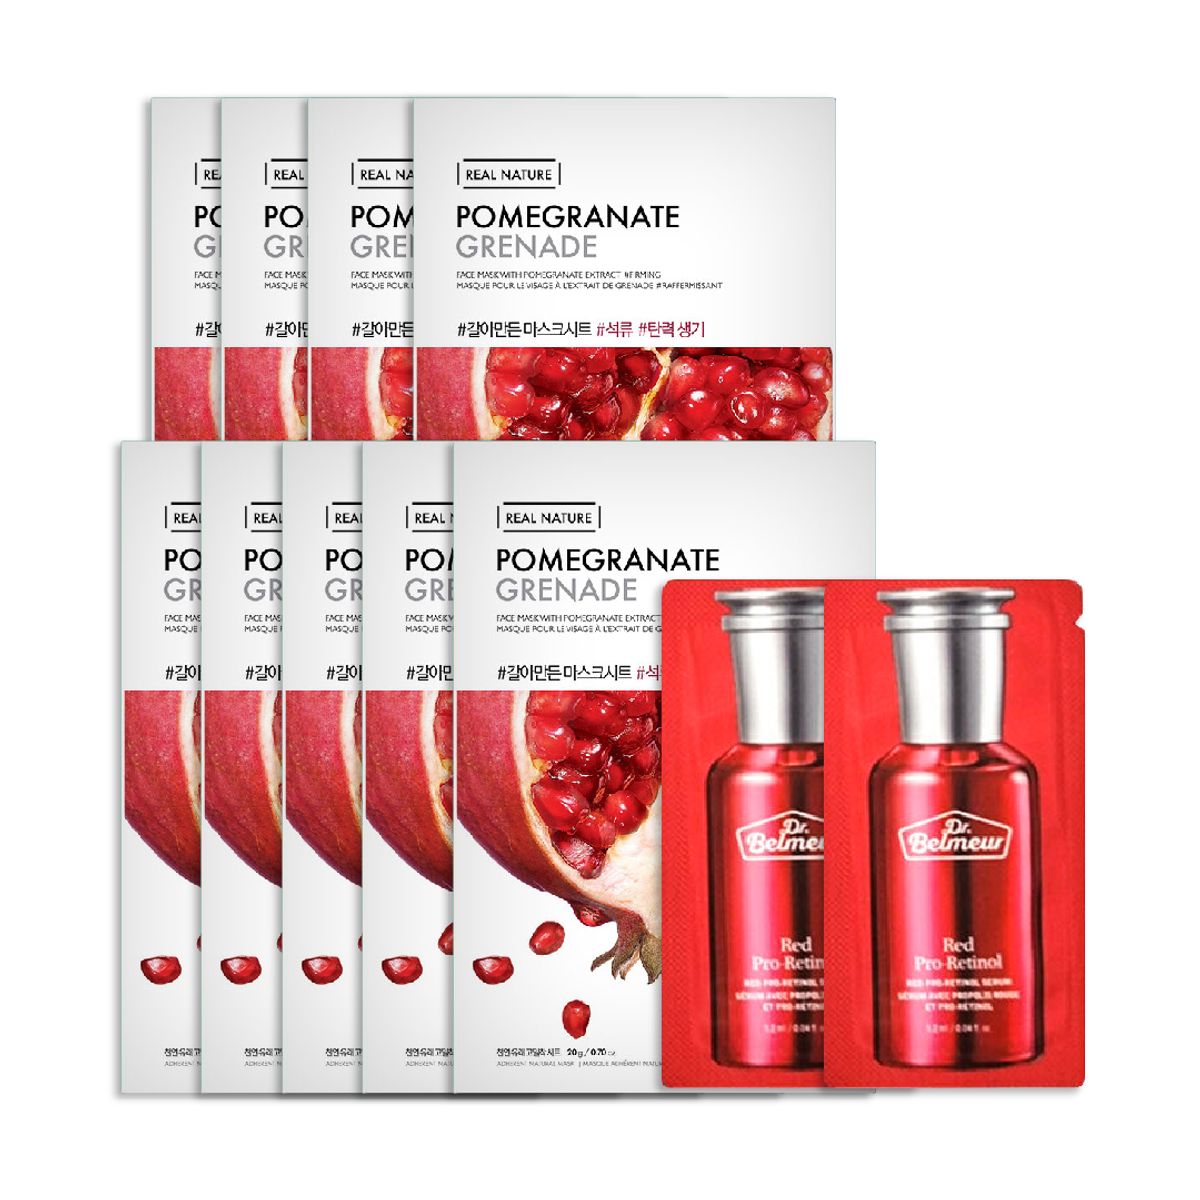 gift-combo-9-mat-na-real-nature-pomegranate-2-sample-tinh-chat-dr-belmeur-red-pro-retinol-1